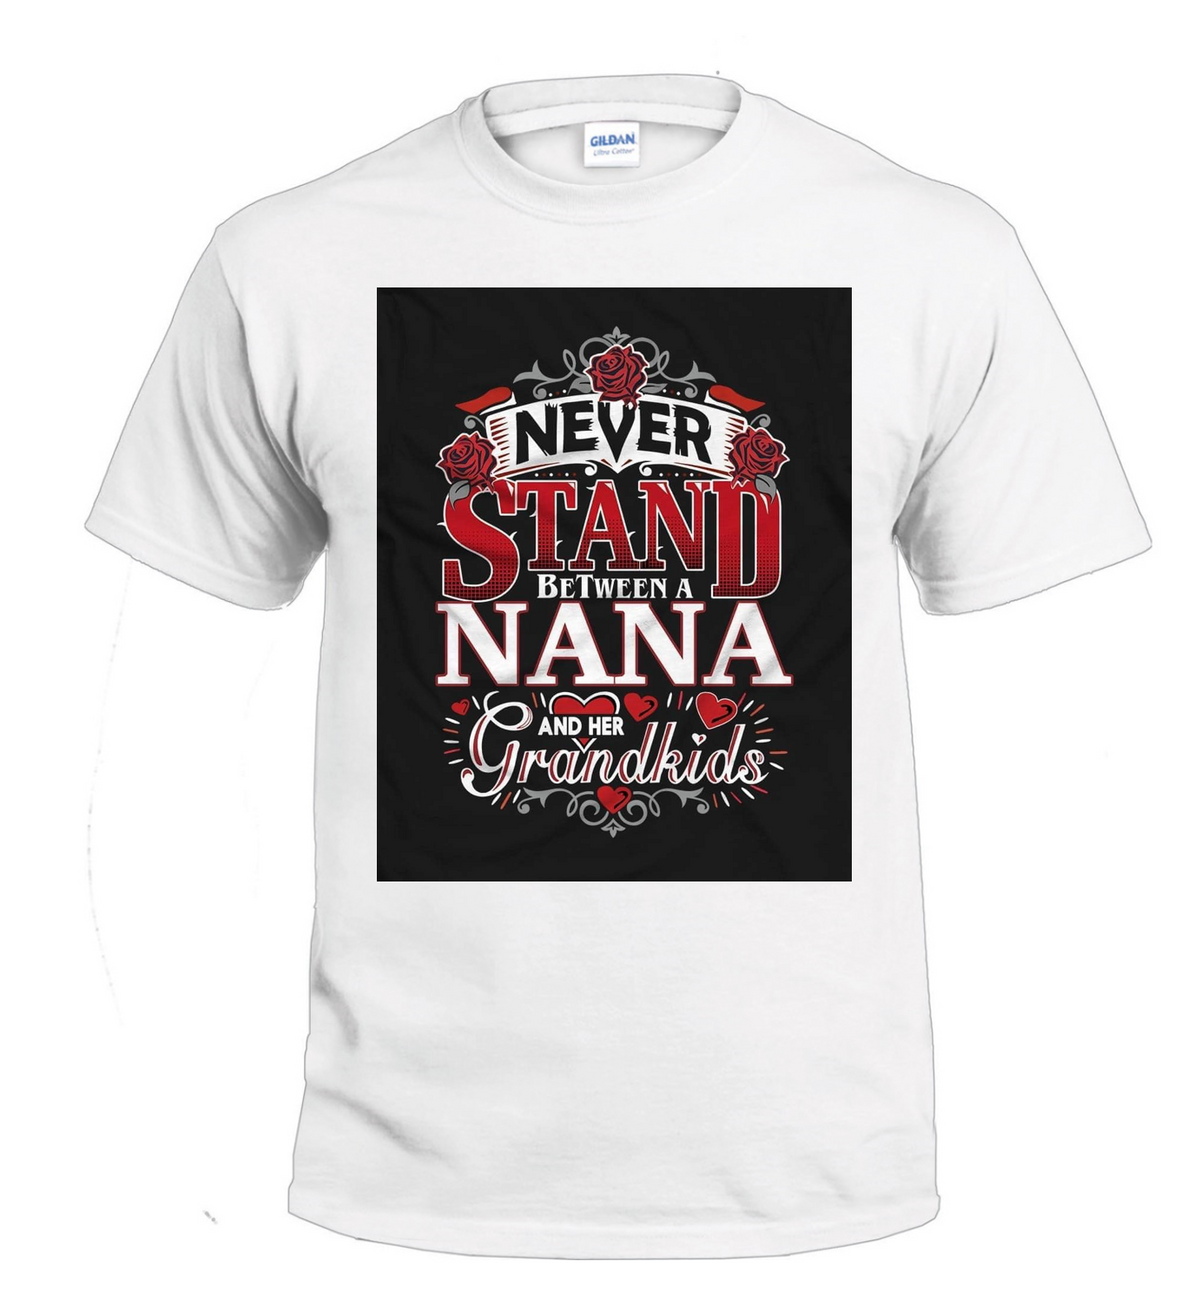 Never Stand Between a Nana and Her Grandkids t-shirt